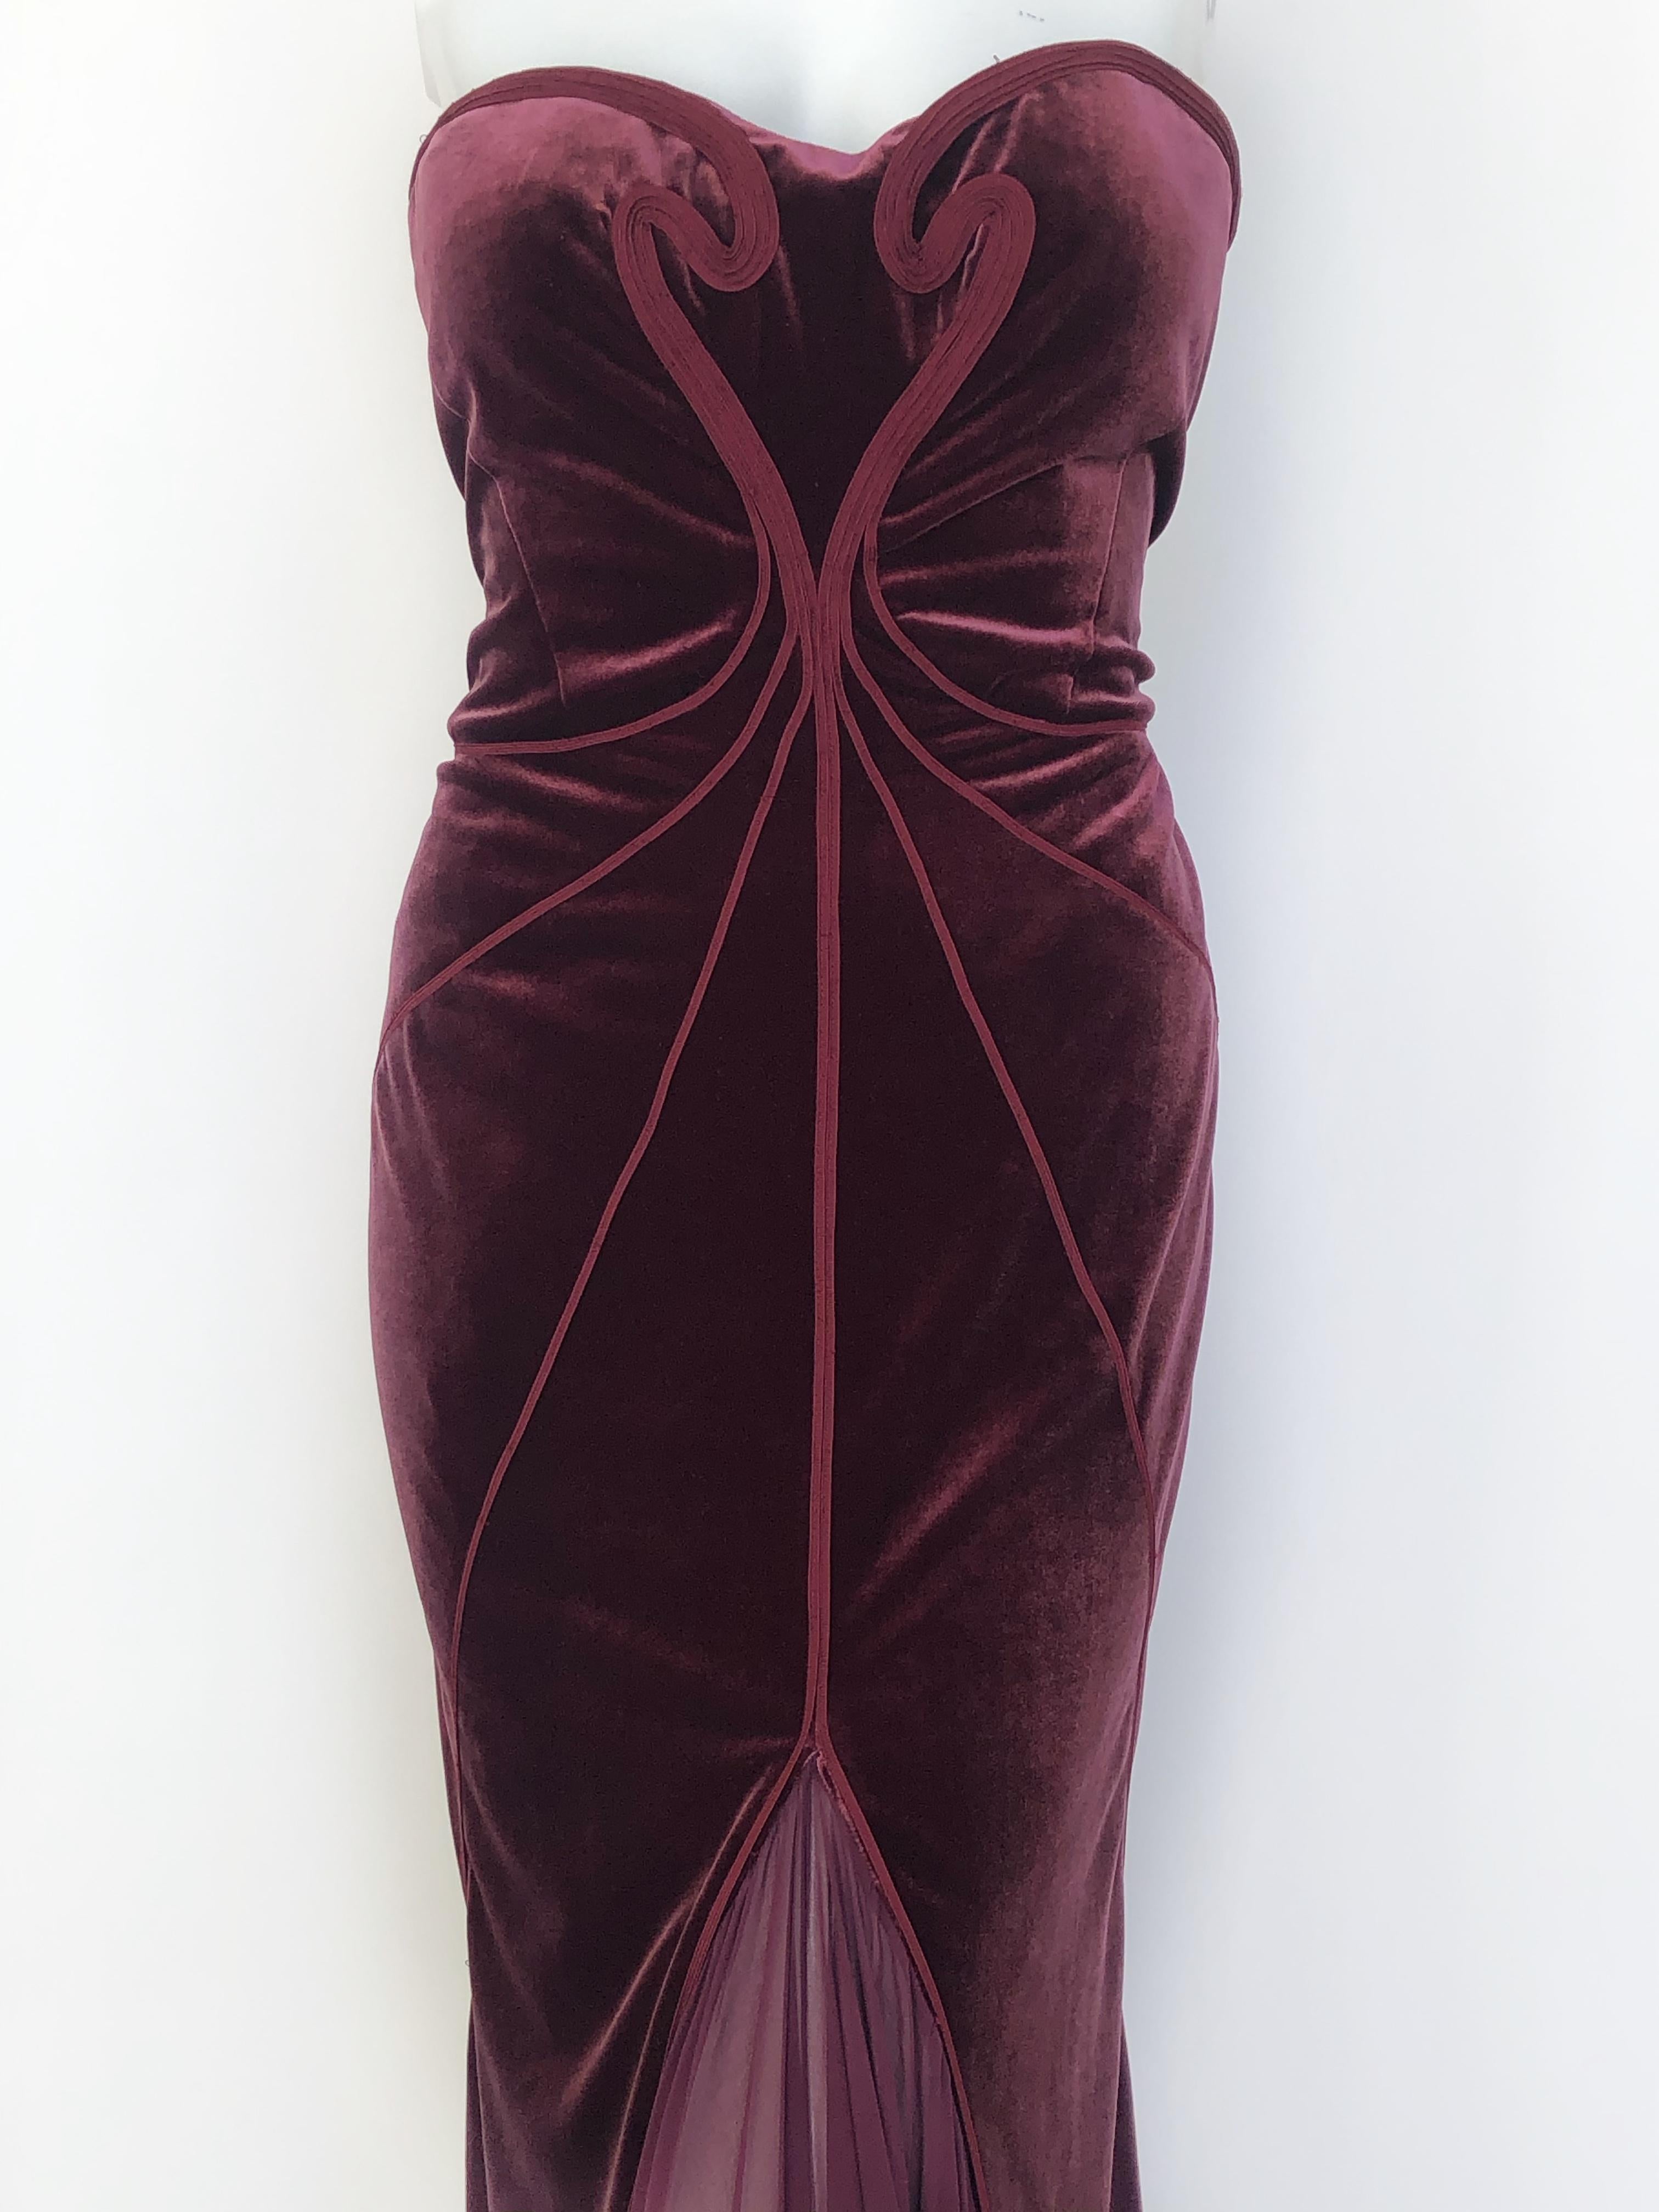 Strapless velvet with beautiful detailing across the bodice, and a sheer gored skirt makes this Zac Posen gown so elegant 